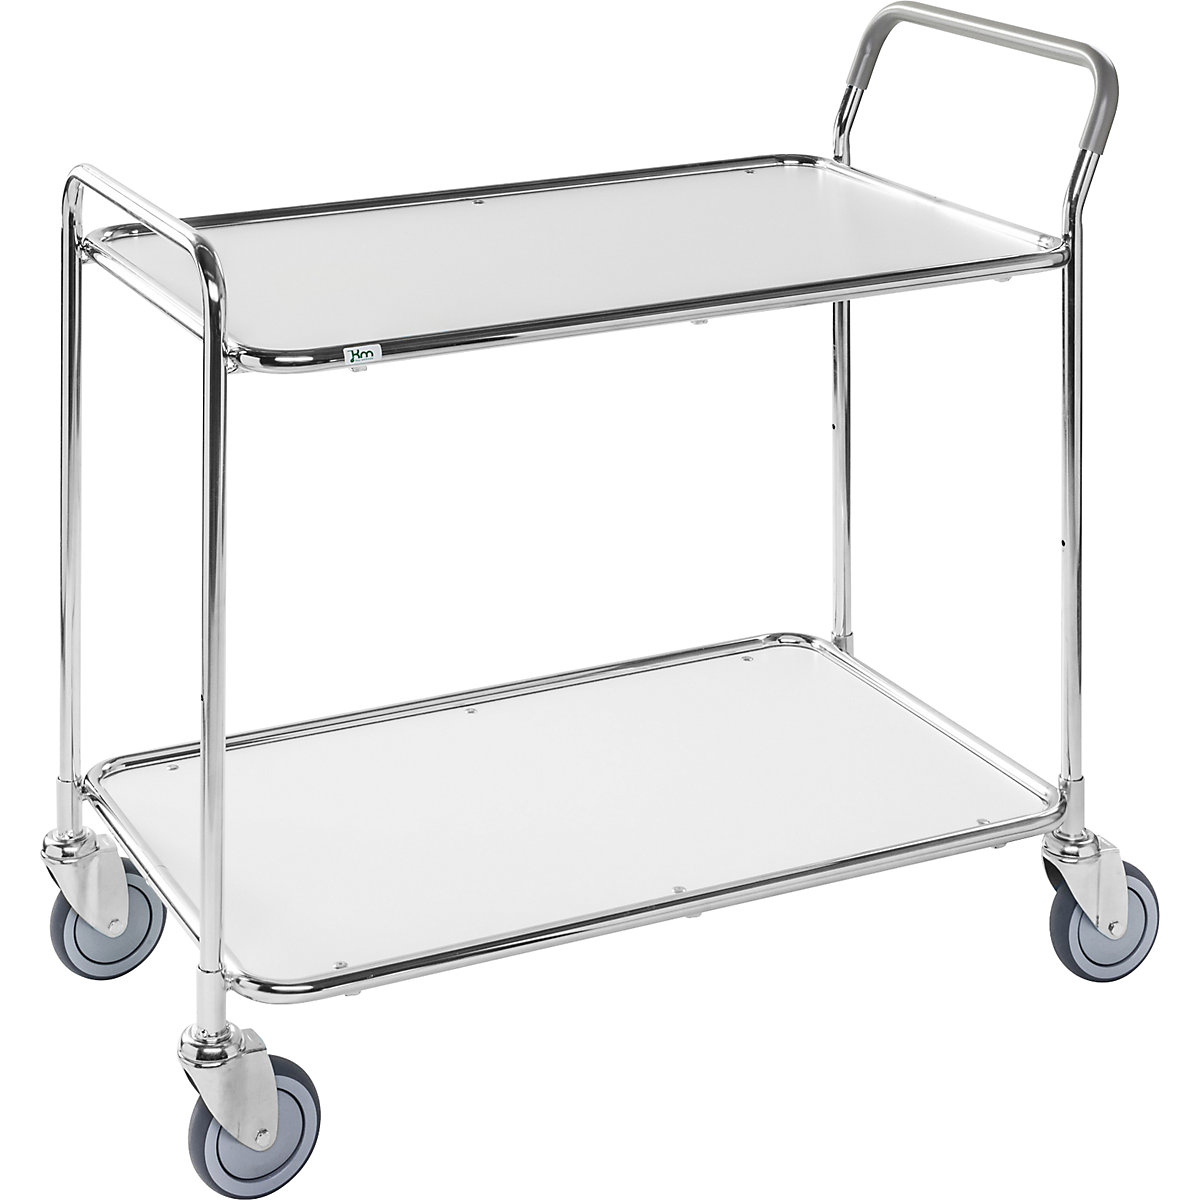 Table trolley – Kongamek, 2 shelves, LxWxH 1020 x 555 x 965 mm, zinc plated / white, 2+ items-5